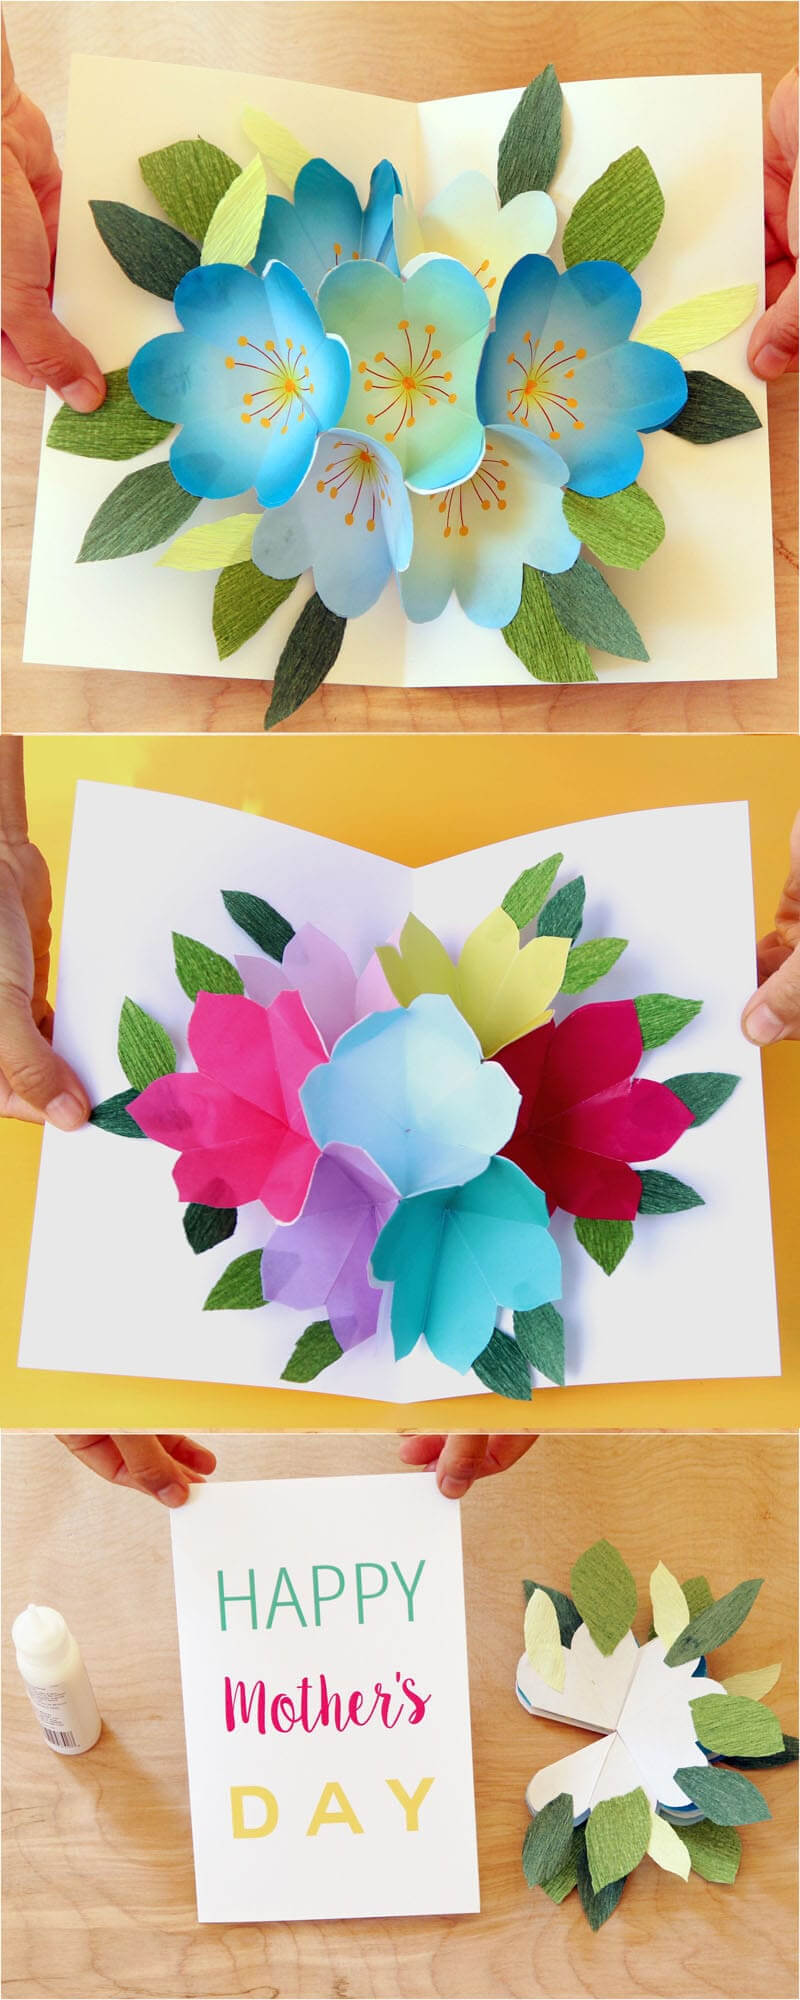 Pop Up Flowers Diy Printable Mother's Day Card – A Piece Of With Diy Pop Up Cards Templates